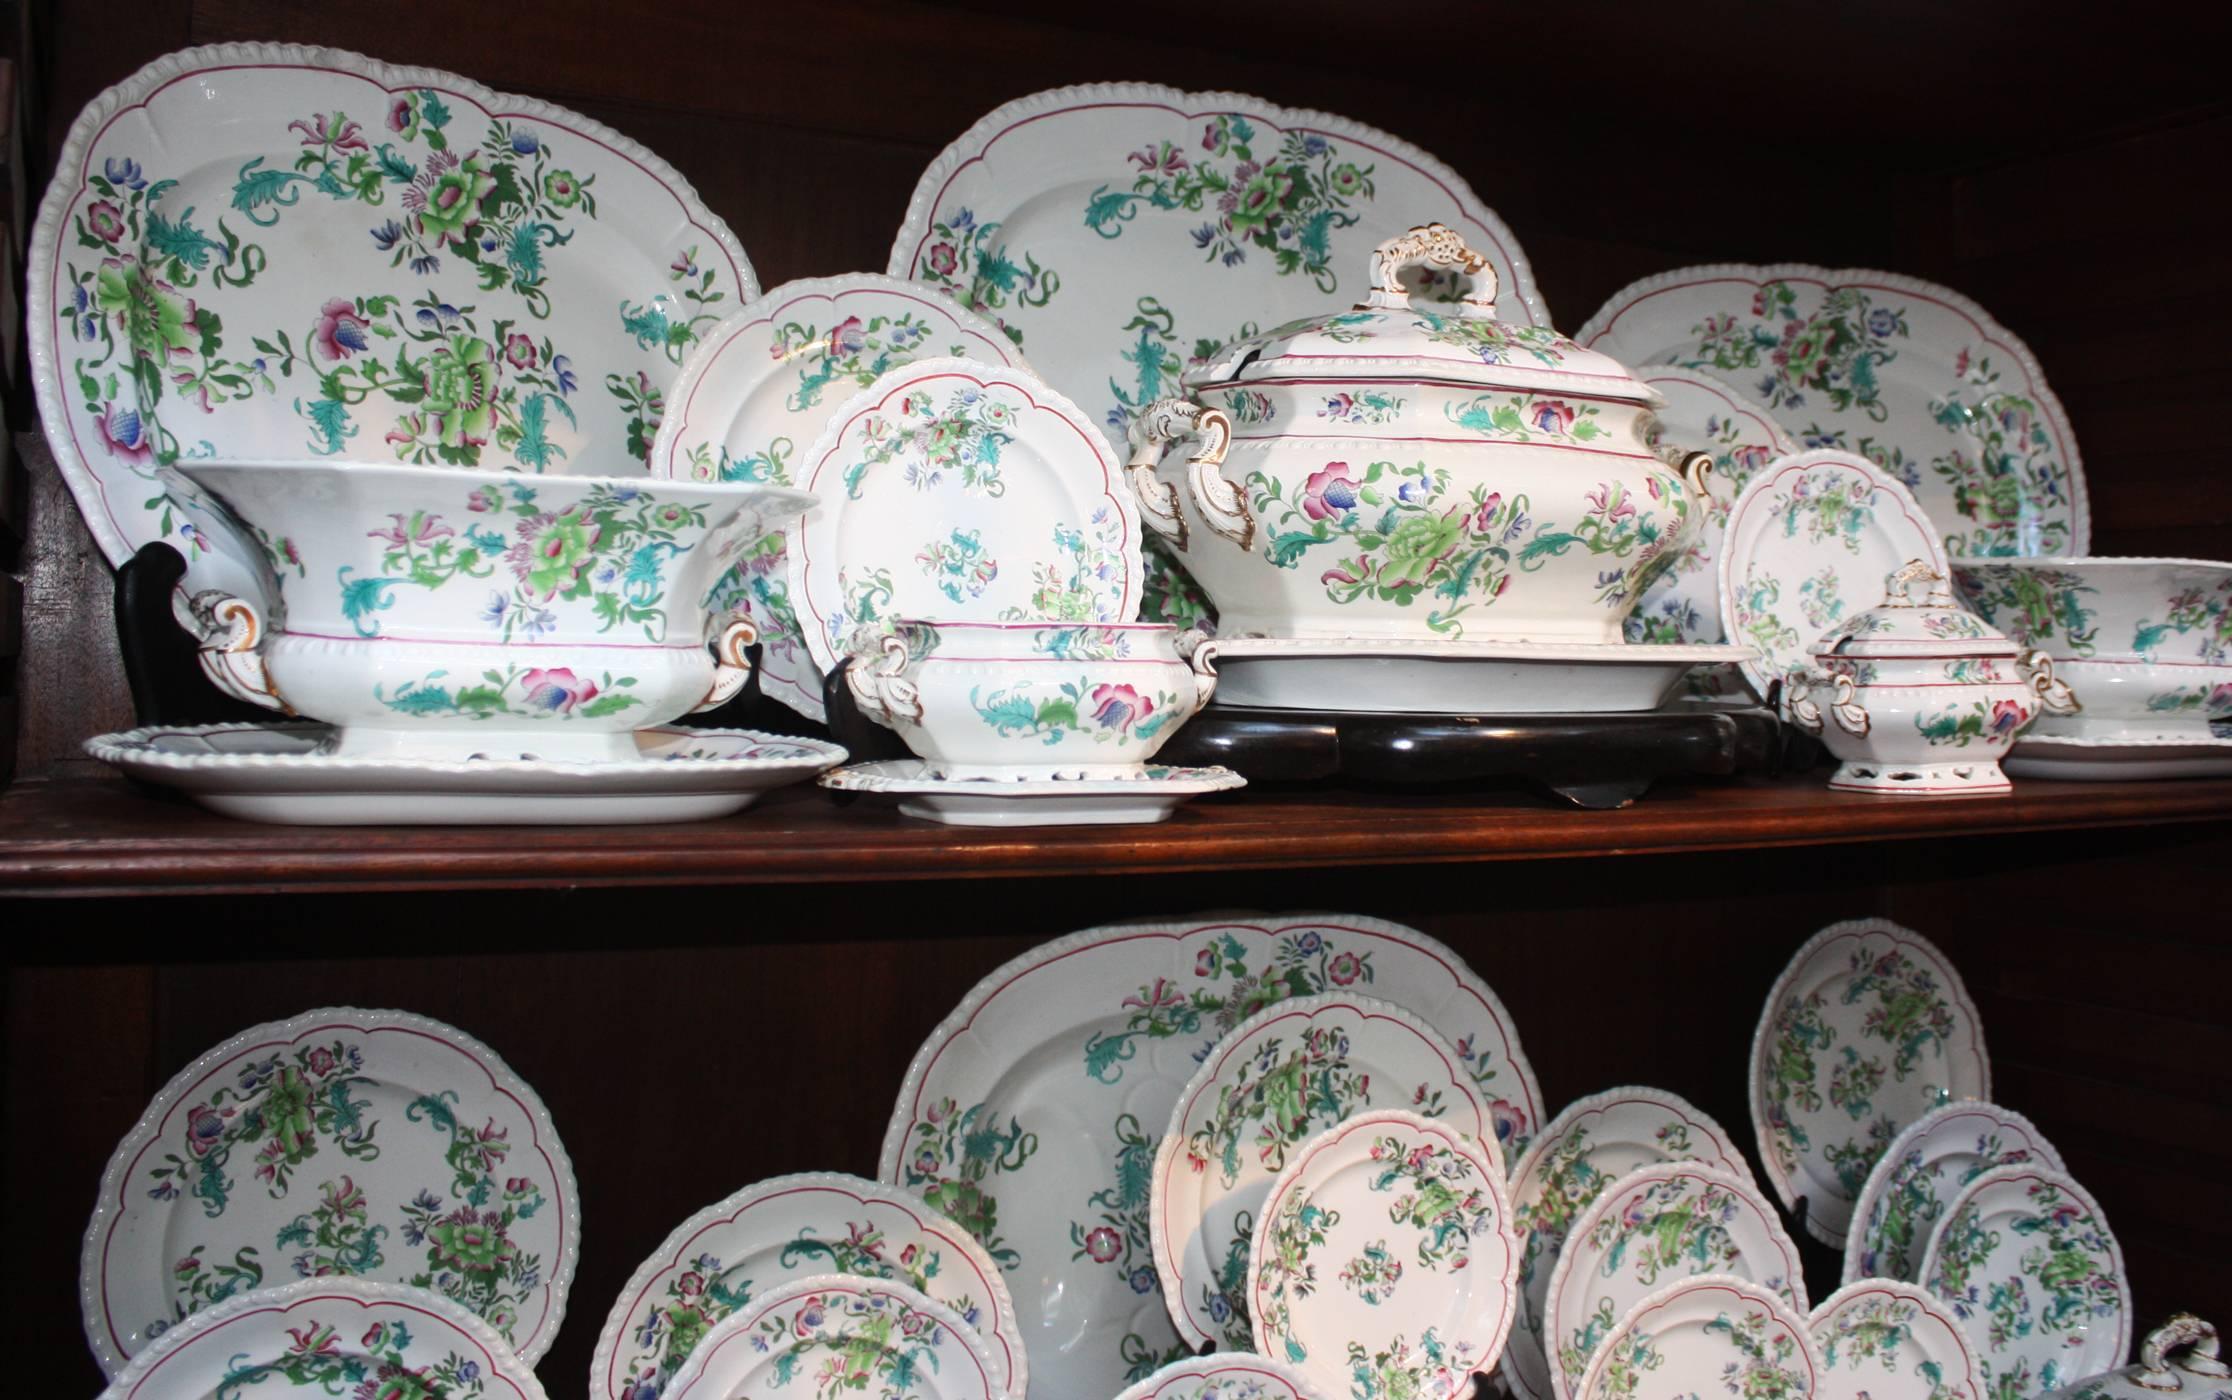 Set of China, including serving pieces by Charles Meigh, Staffordshire, England, with impressed mark 